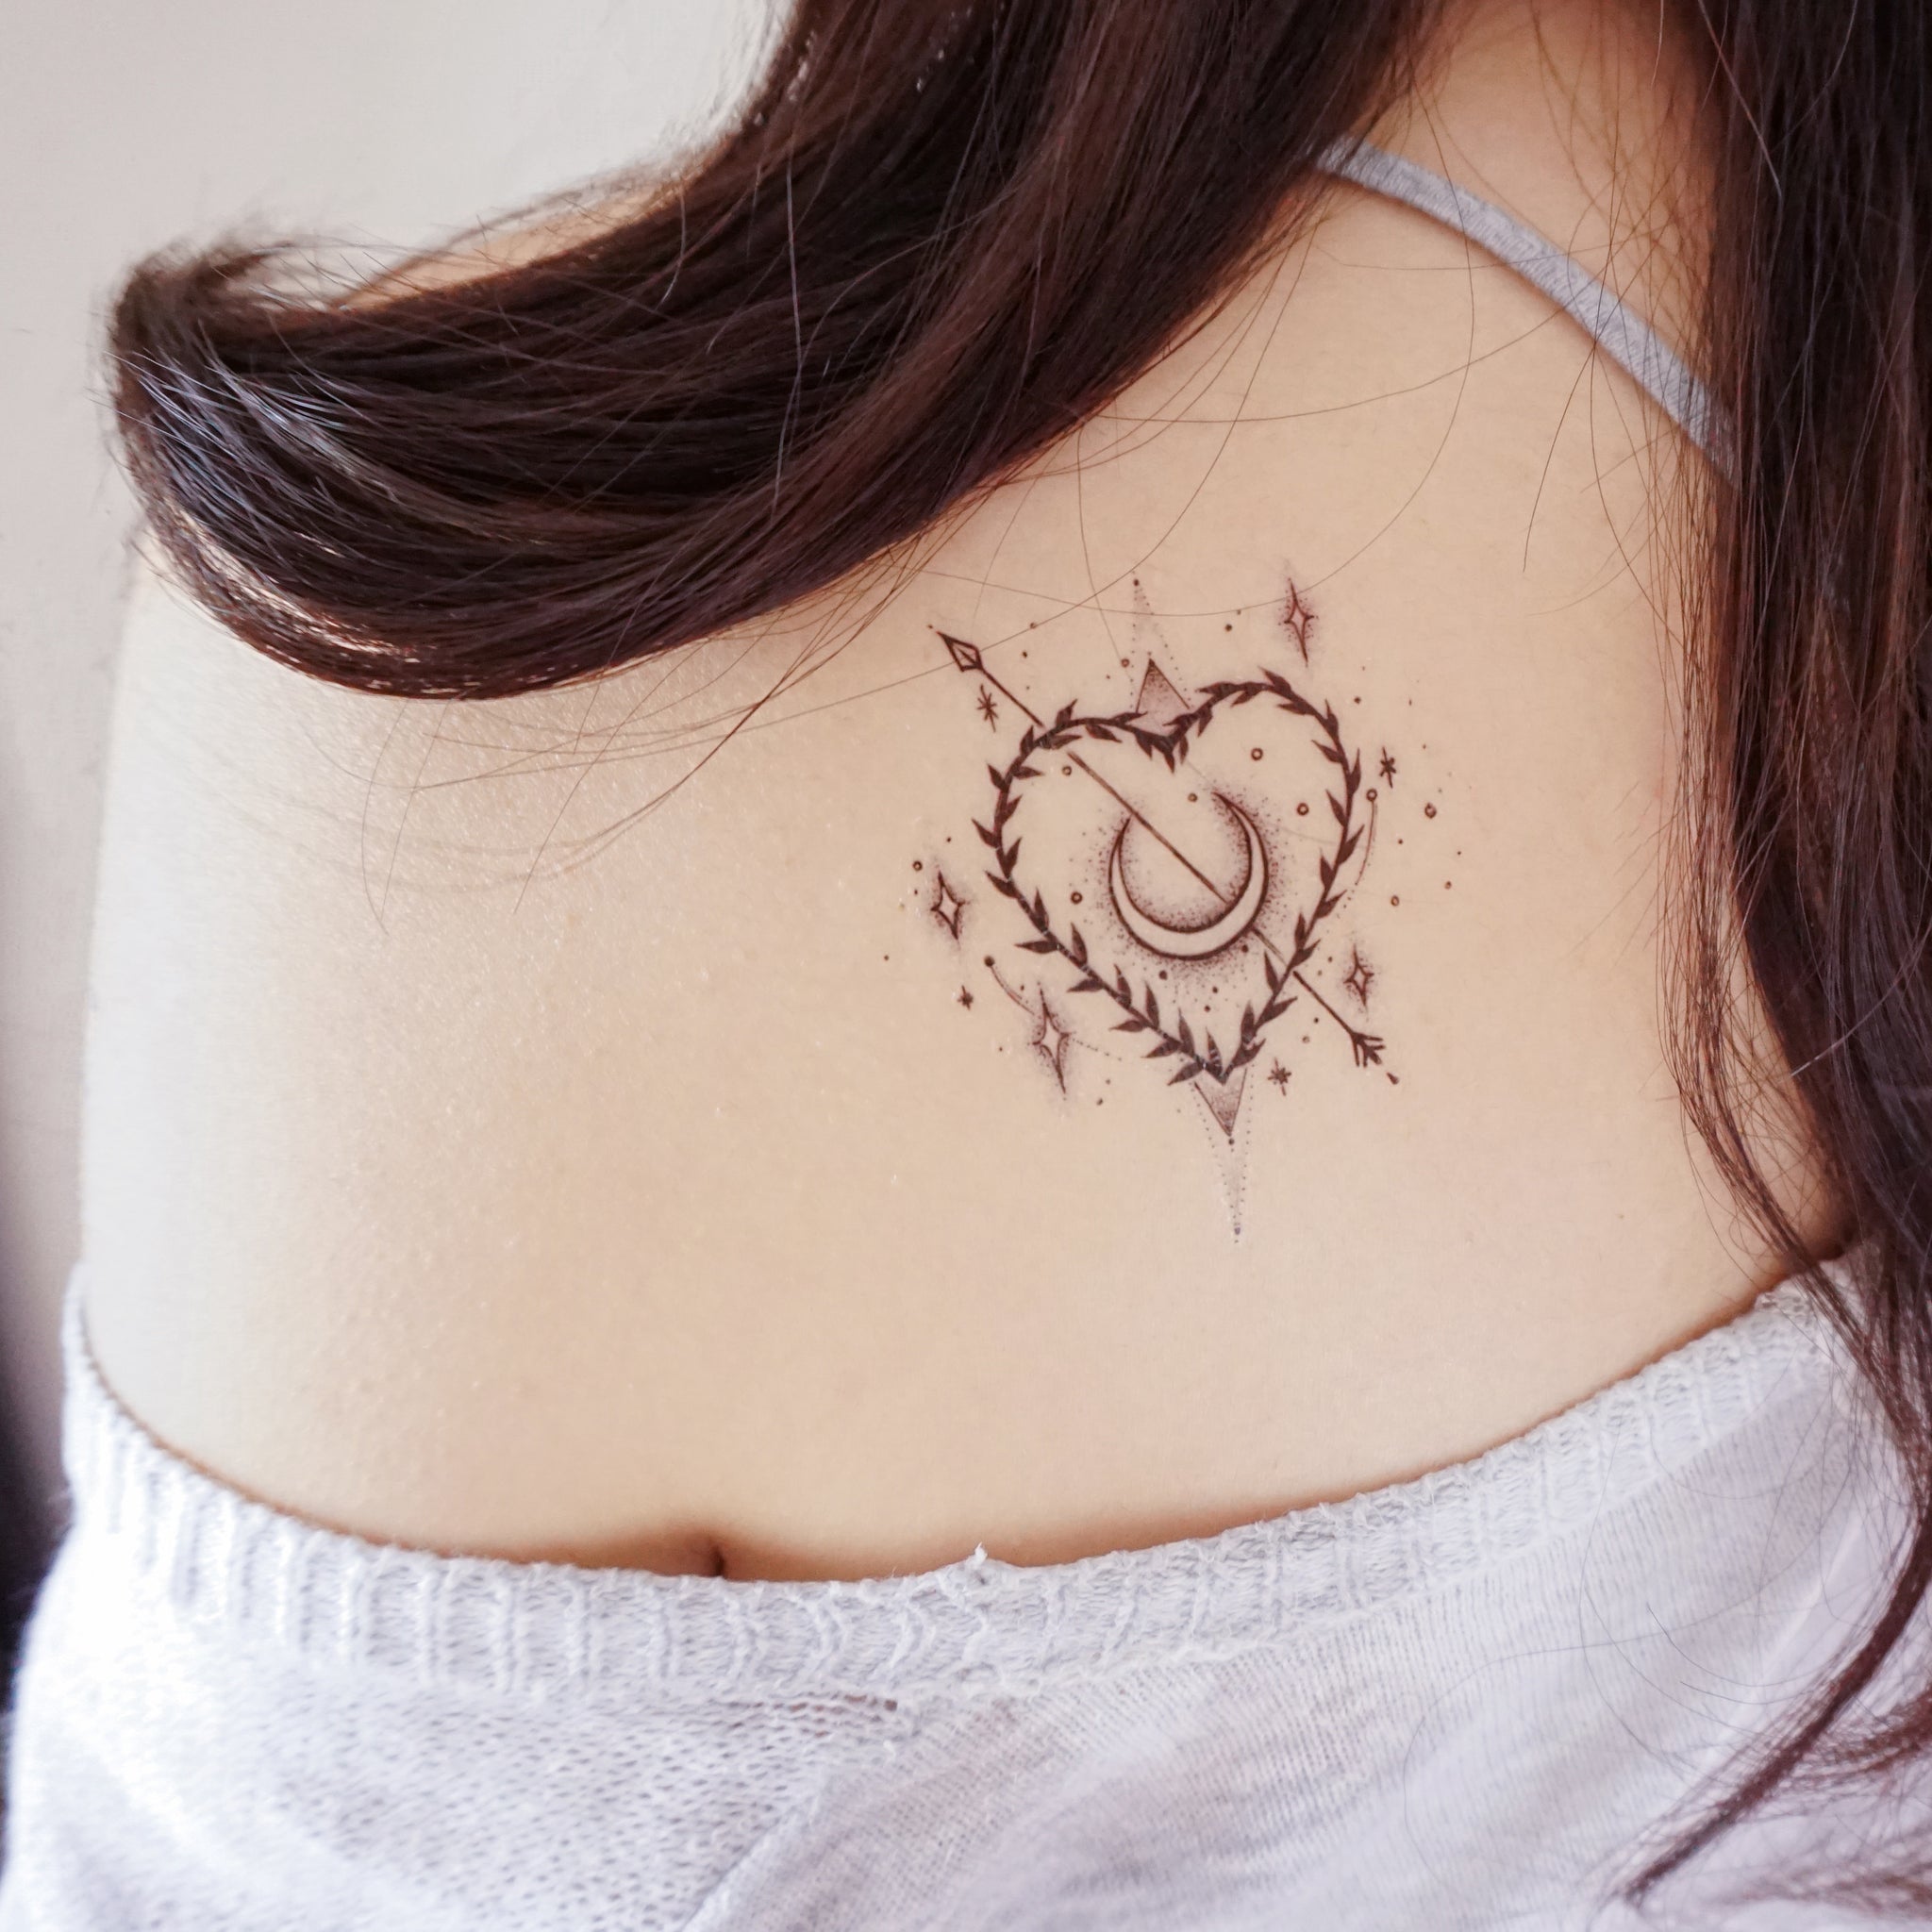 Image Details IST1457408435  Heart with arrow Tattoo symbol of love  Linear style